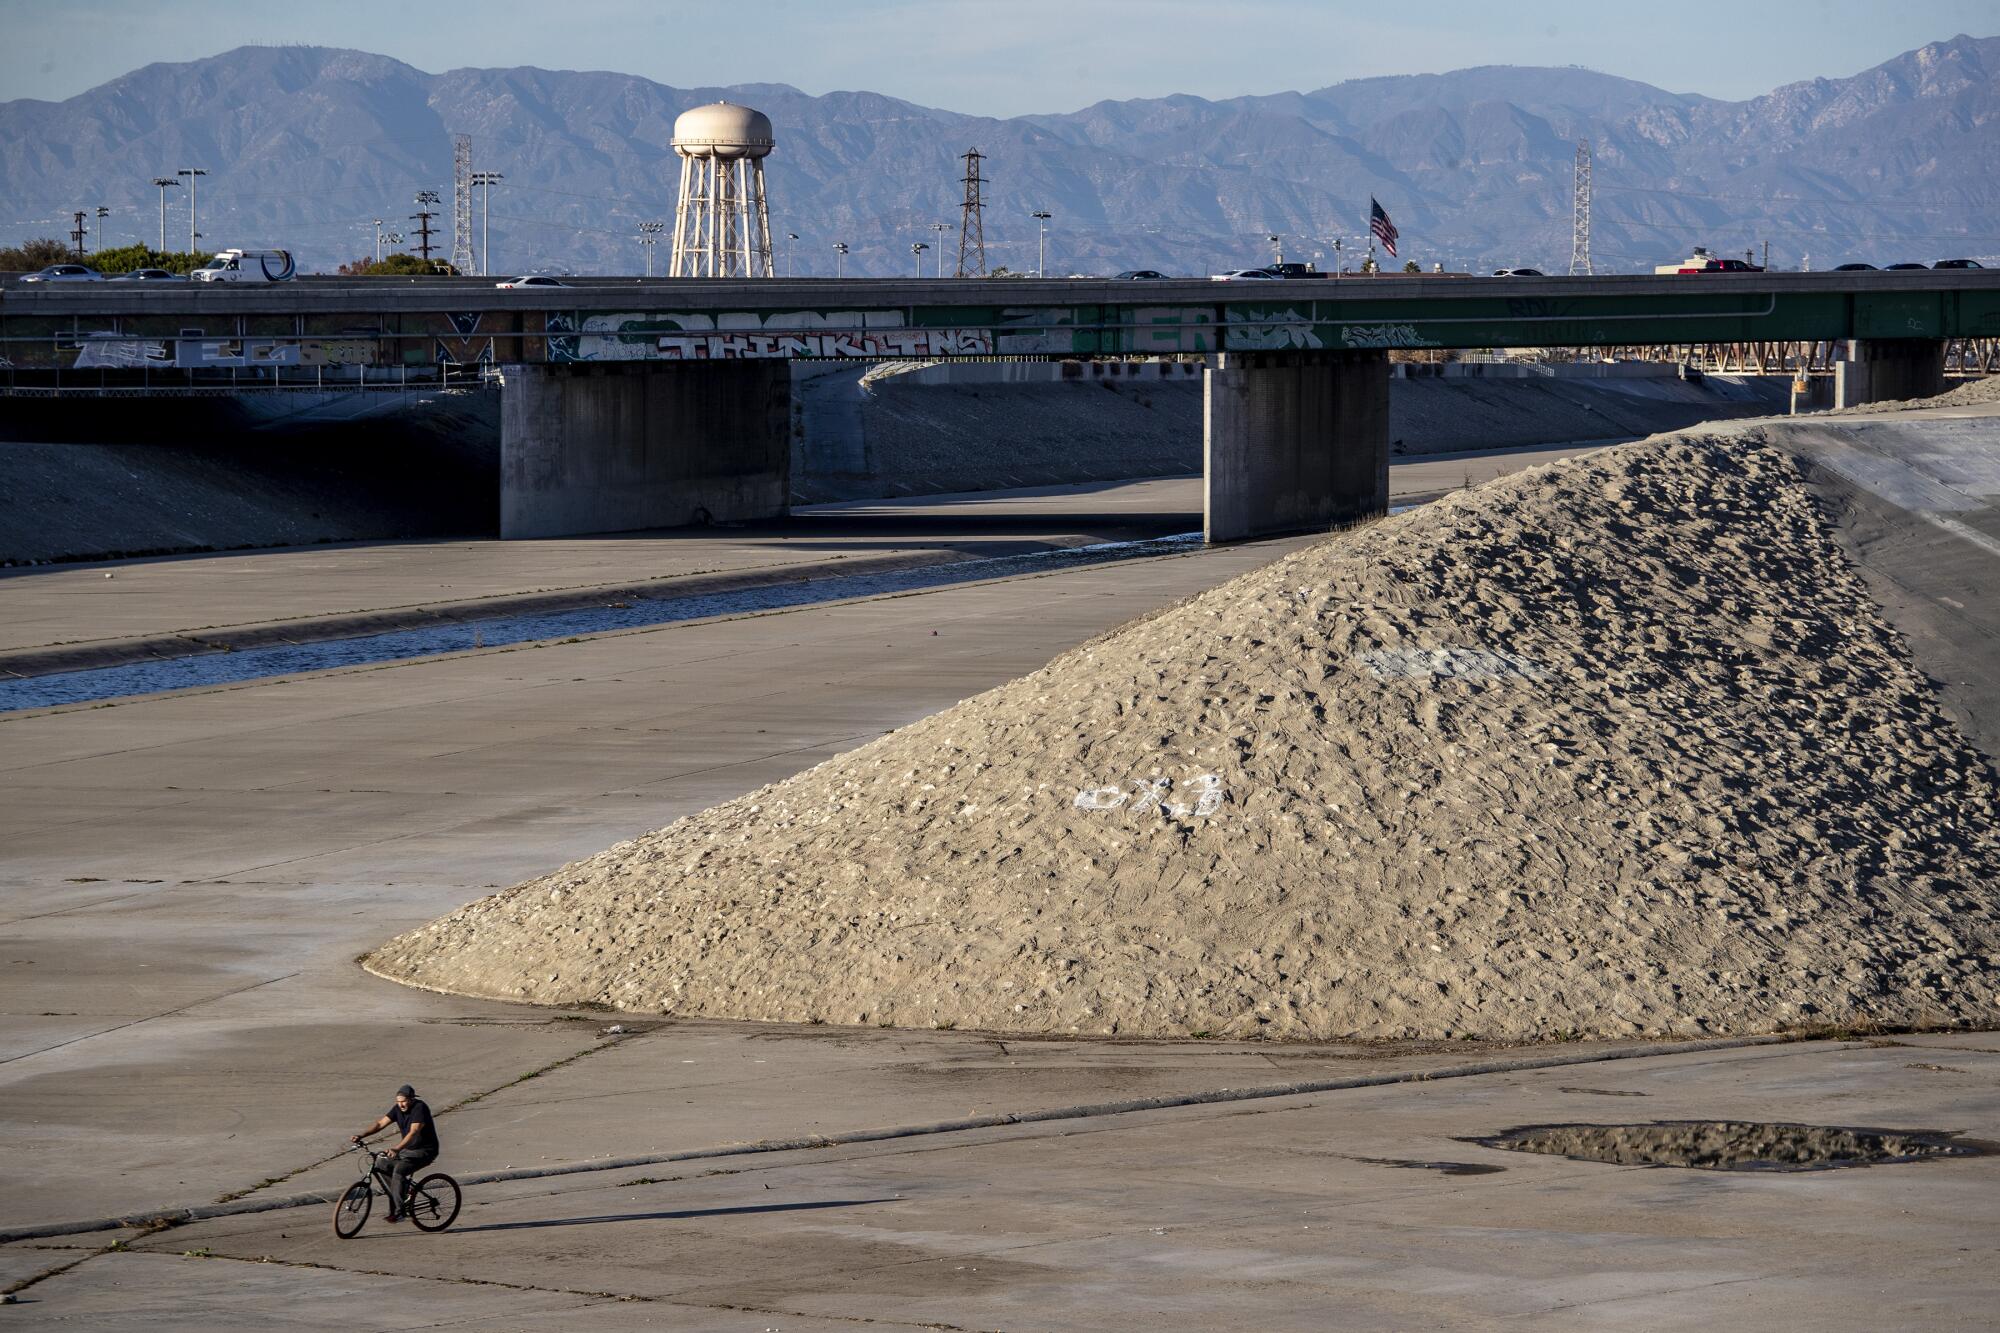  A cyclist rides in the Los Angeles River near what might be Confluence Point Park Sunday, Jan. 10, 2021 in South Gate.